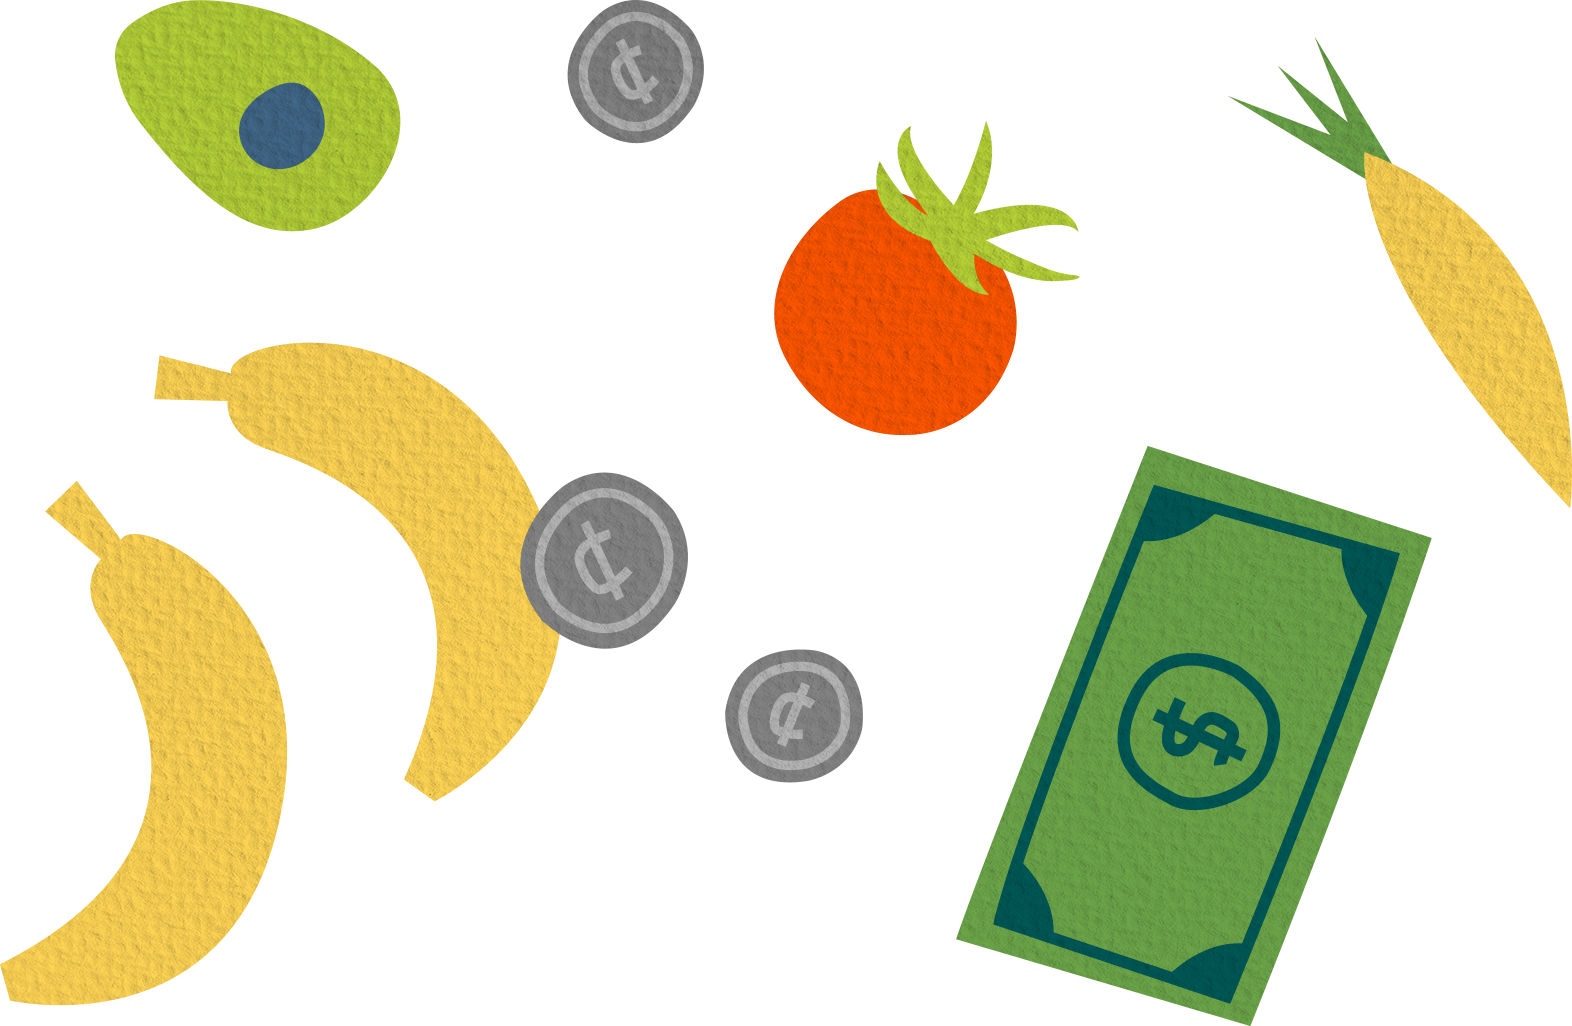 Produce and money falling into a garbage can.